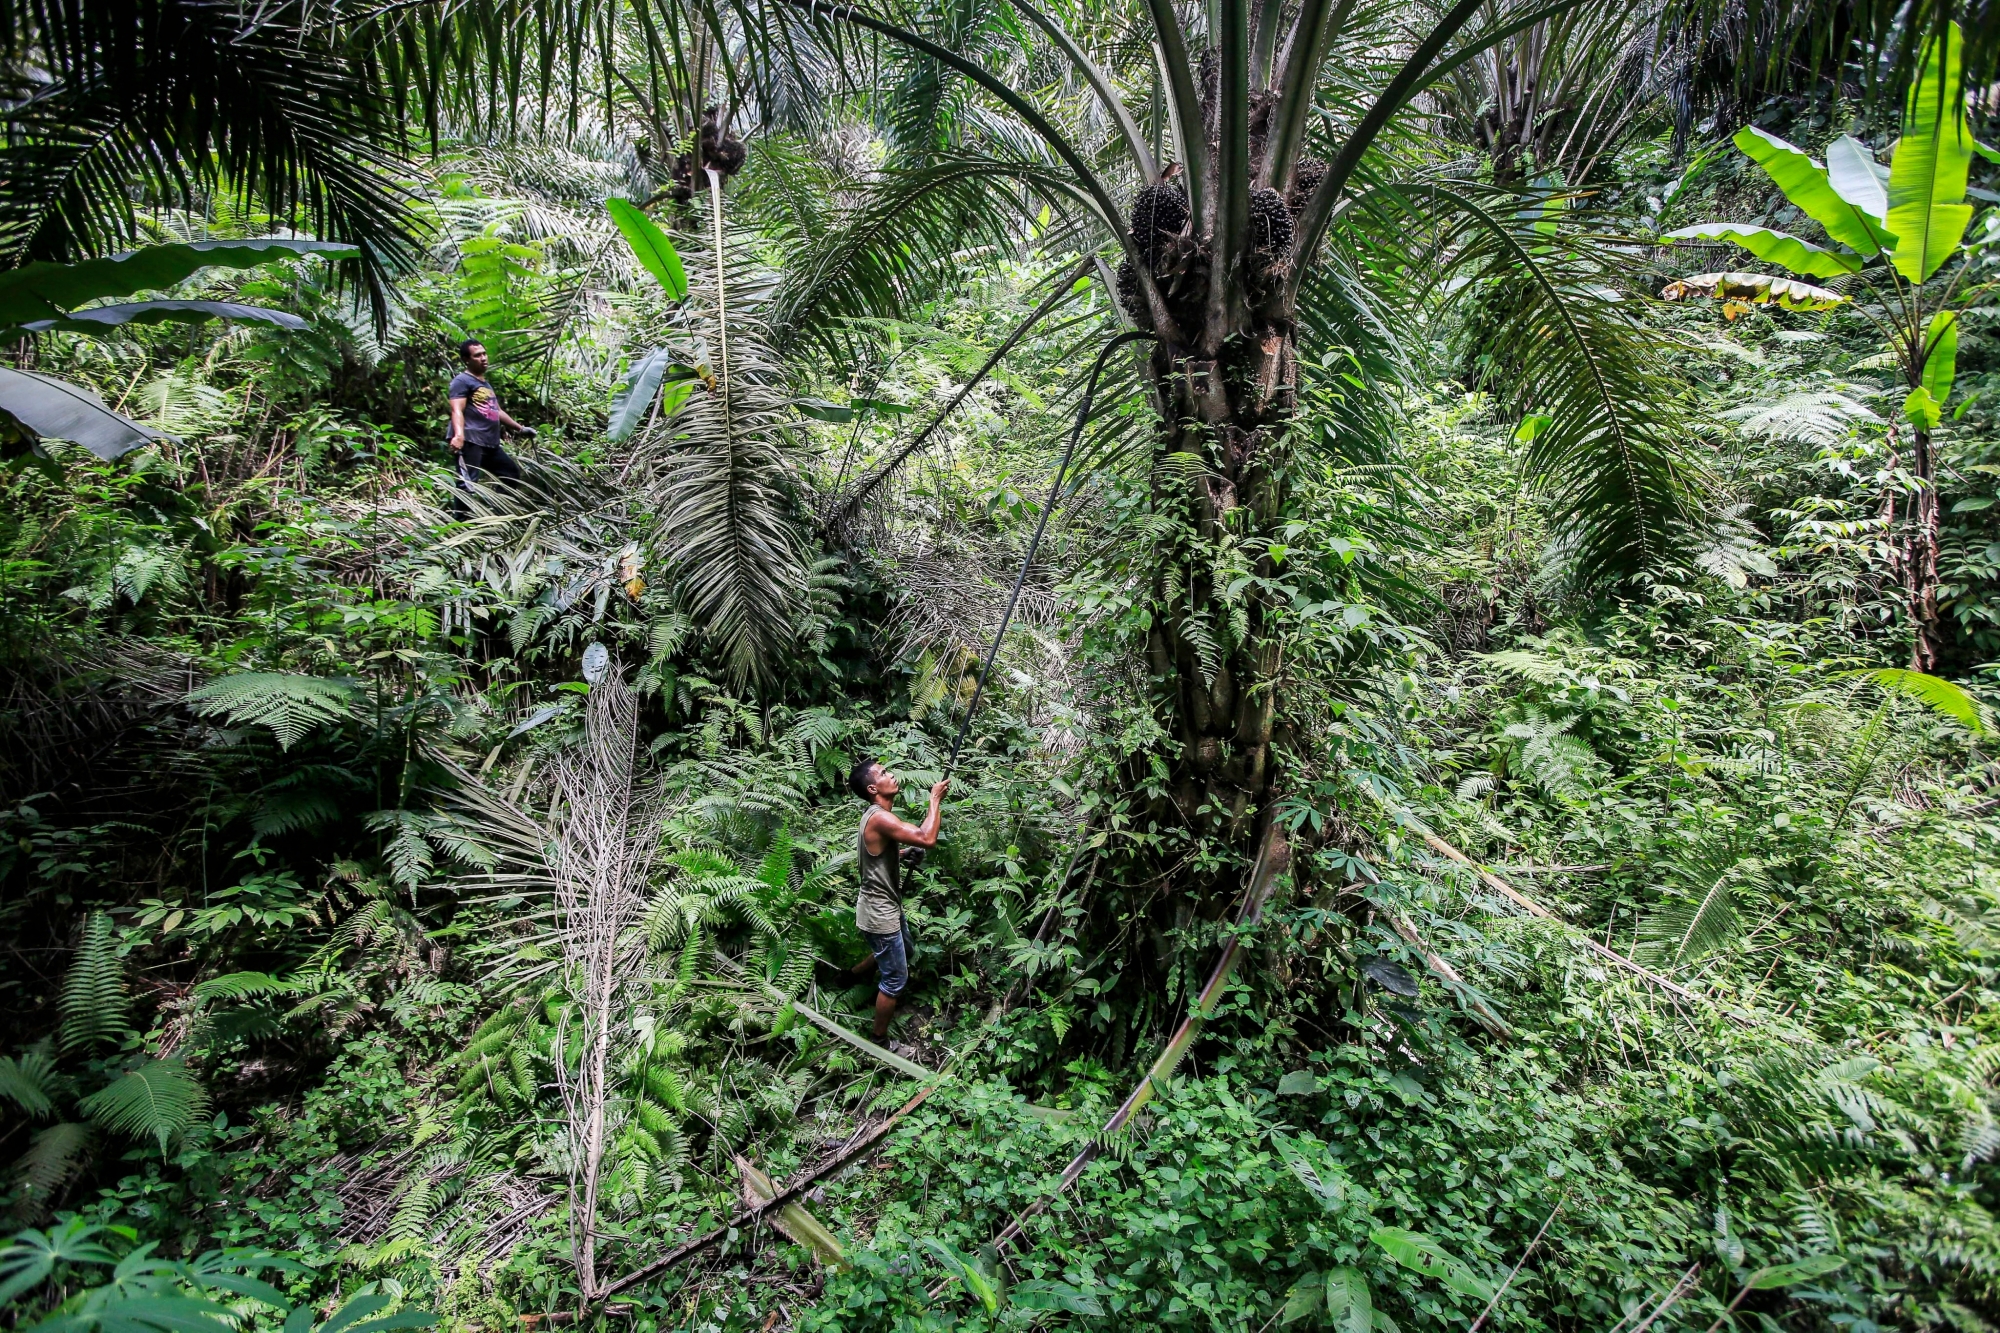 epa05651452 (12/42) An Indonesian worker uses a tall stick to reach and harvest palm fruits at a palm oil plantation in Deli Serdang, North Sumatra, Indonesia, 16 September 2016. Indonesia is the world's largest producer of Palm Oil, made from the palm fruit, followed closely by Malaysia. Palm plantations built on destroyed tropical rainforest, have seen the death and displacements of many species, among them the endangered orangutan. Palm oil is an ingredient in many products across supermarket shelves. Consumer groups are pressing end users to buy only products containing substitutes or sustainably sourced palm oil, warning species and pristine habitats are on the brink of being lost forever to humankind. EPA/DEDI SINUHAJI PLEASE REFER TO THE ADVISORY NOTICE (epa05651440) FOR FULL PACKAGE TEXT ArcInfo